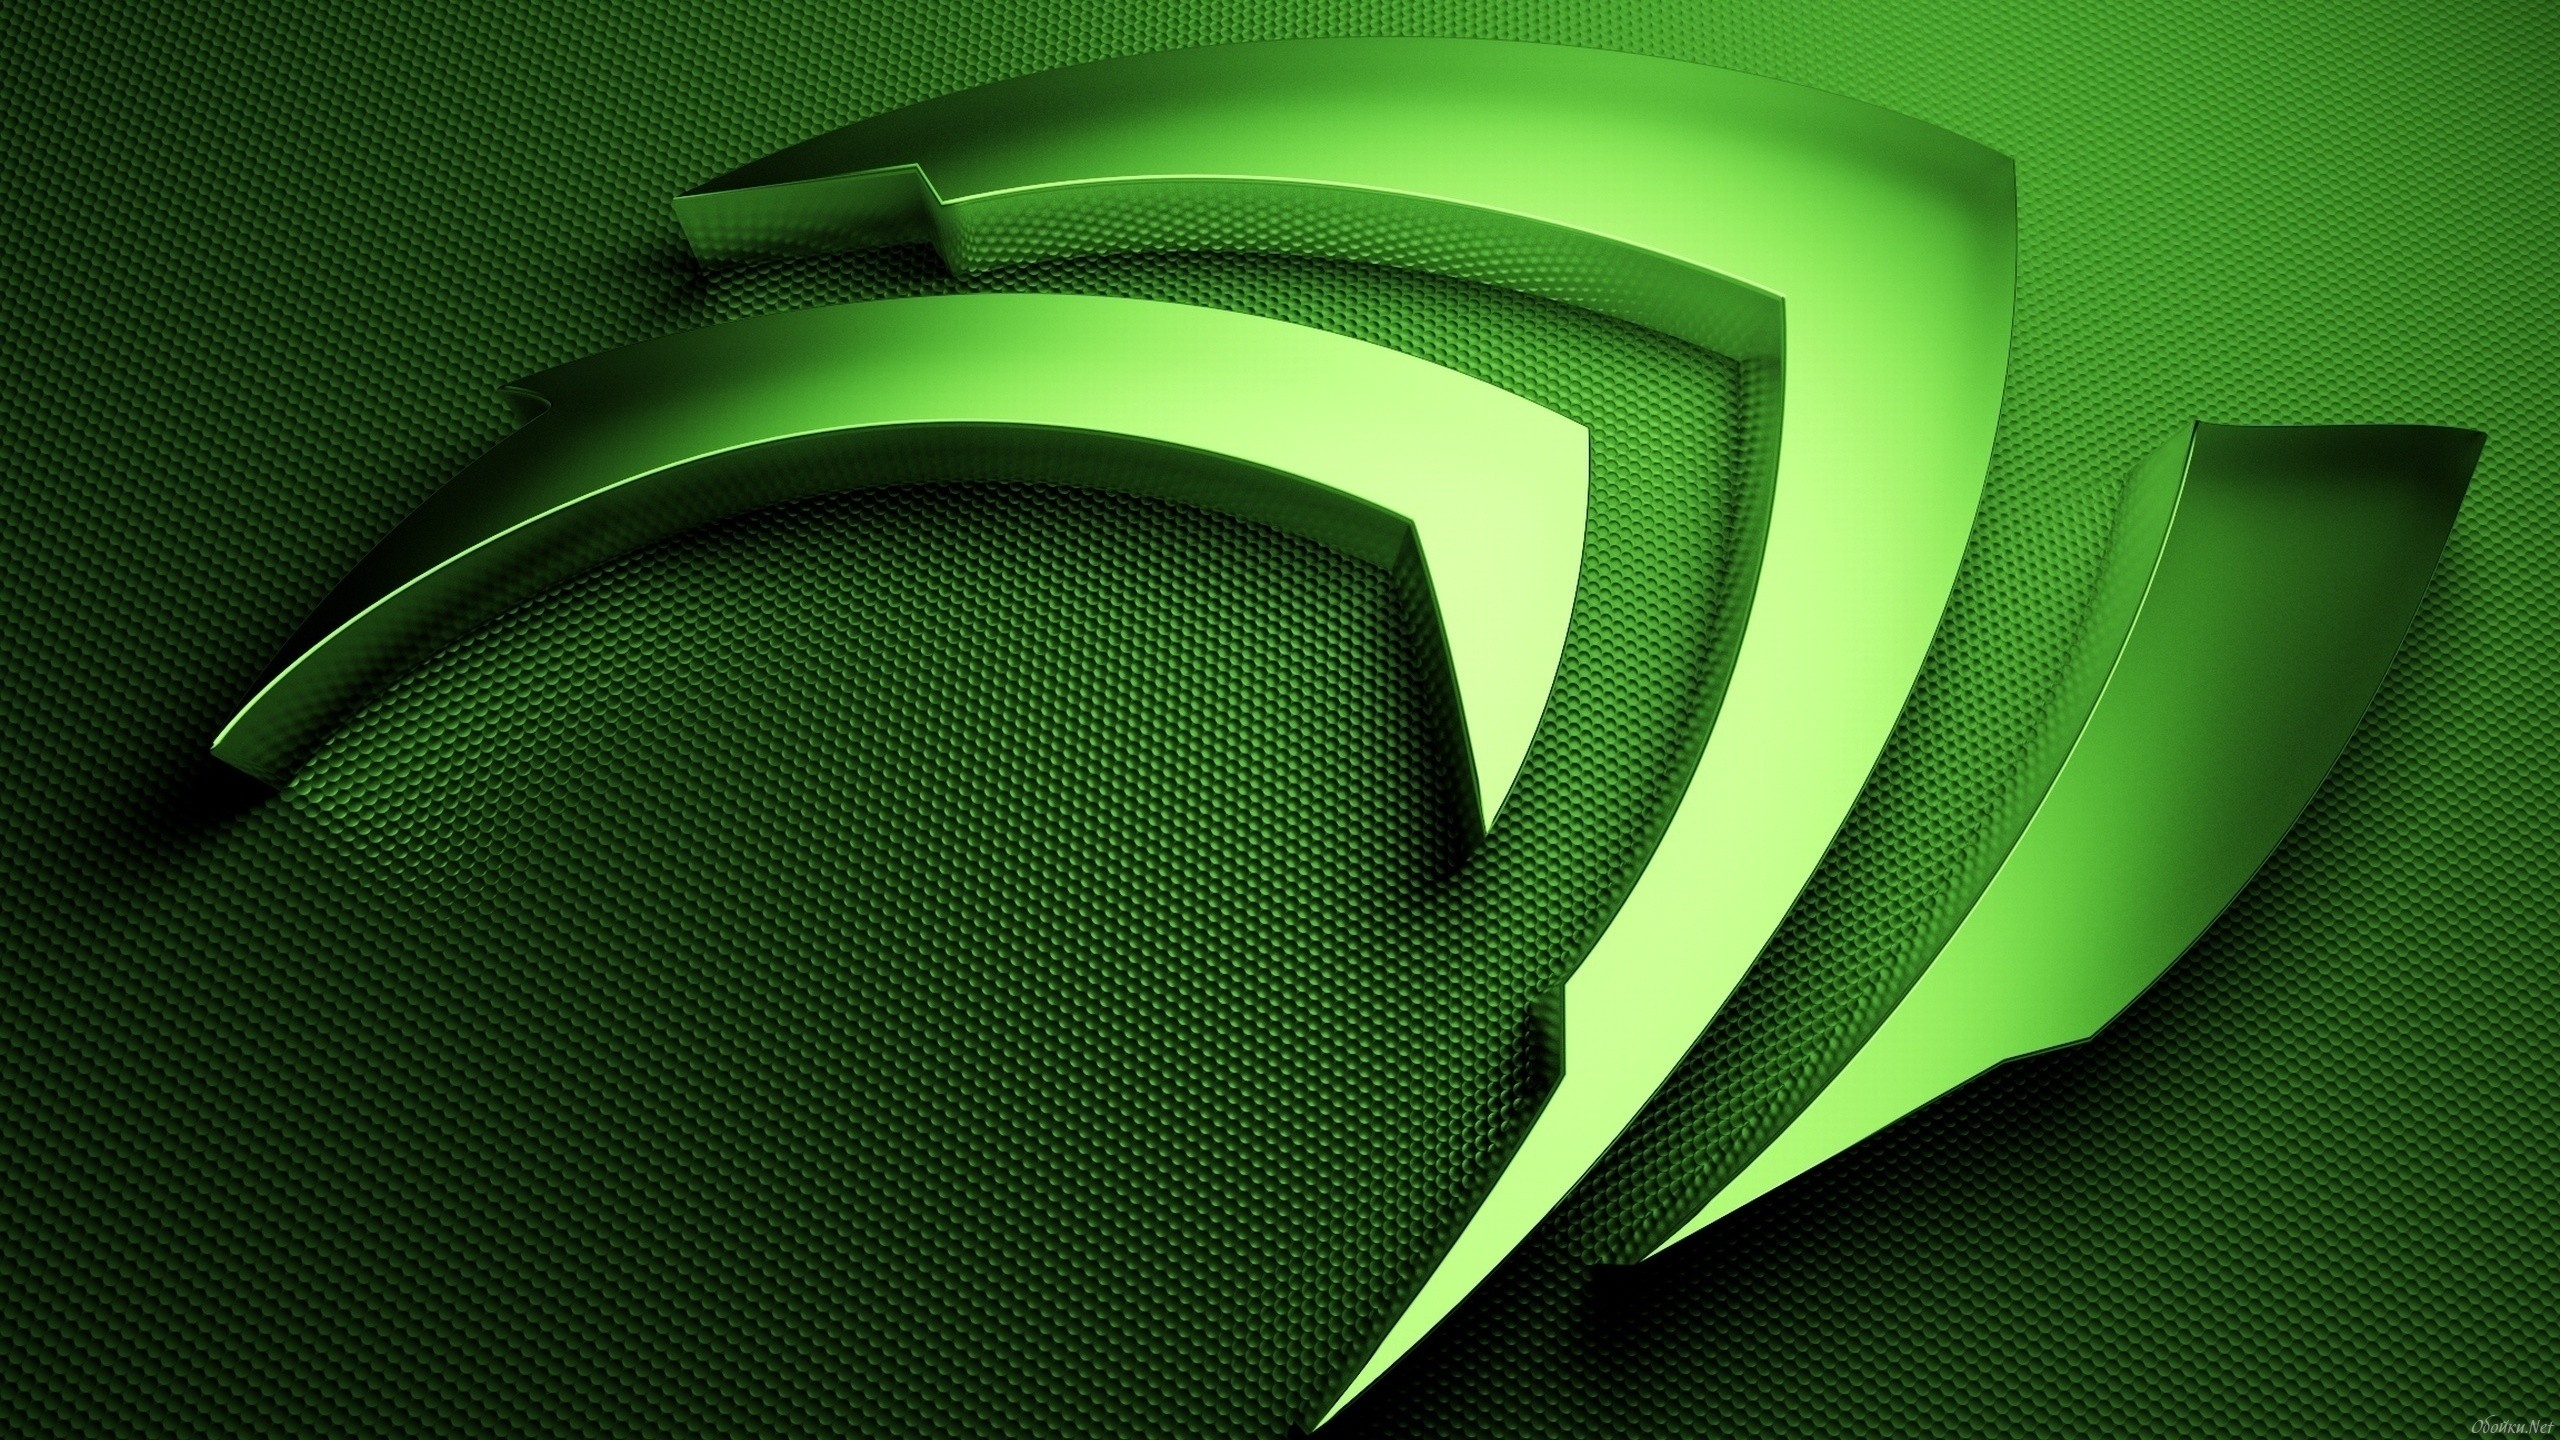 General 2560x1440 logo Nvidia technology GPUs computer metal texture brand green simple background watermarked minimalism